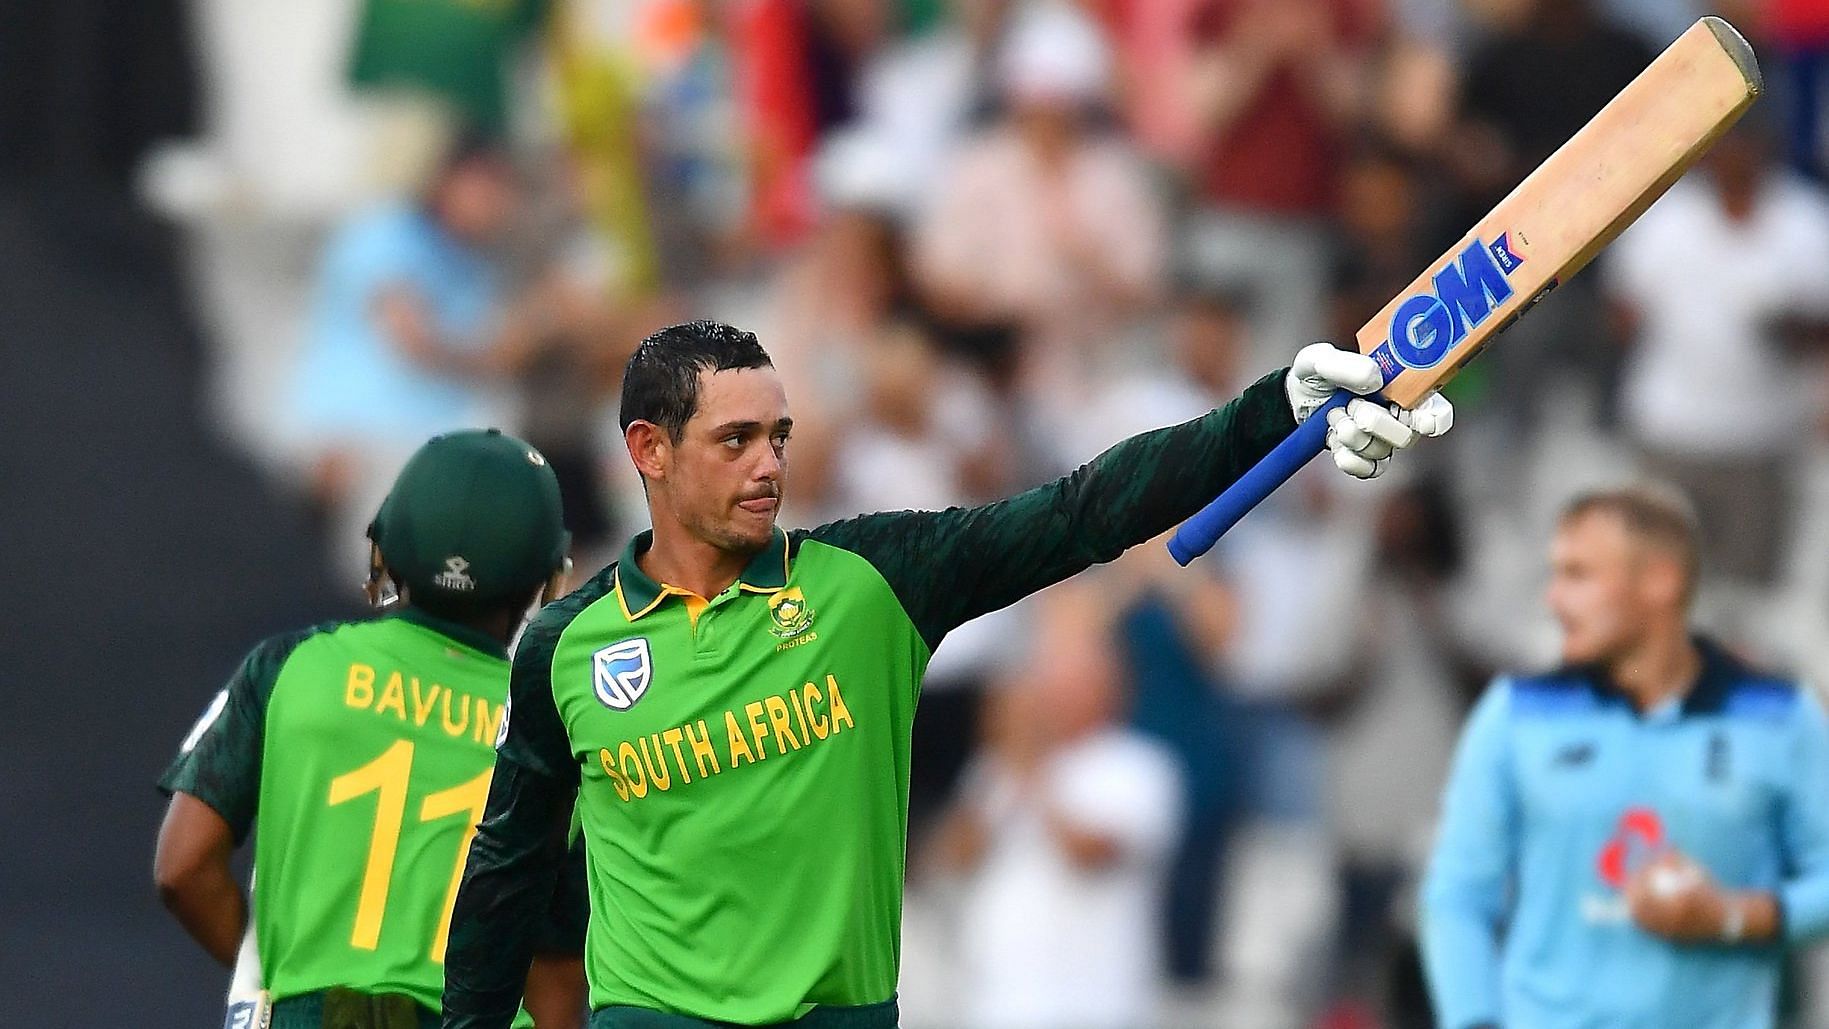 Quinton de Kock’s knock was laced with 11 boundaries and a six.